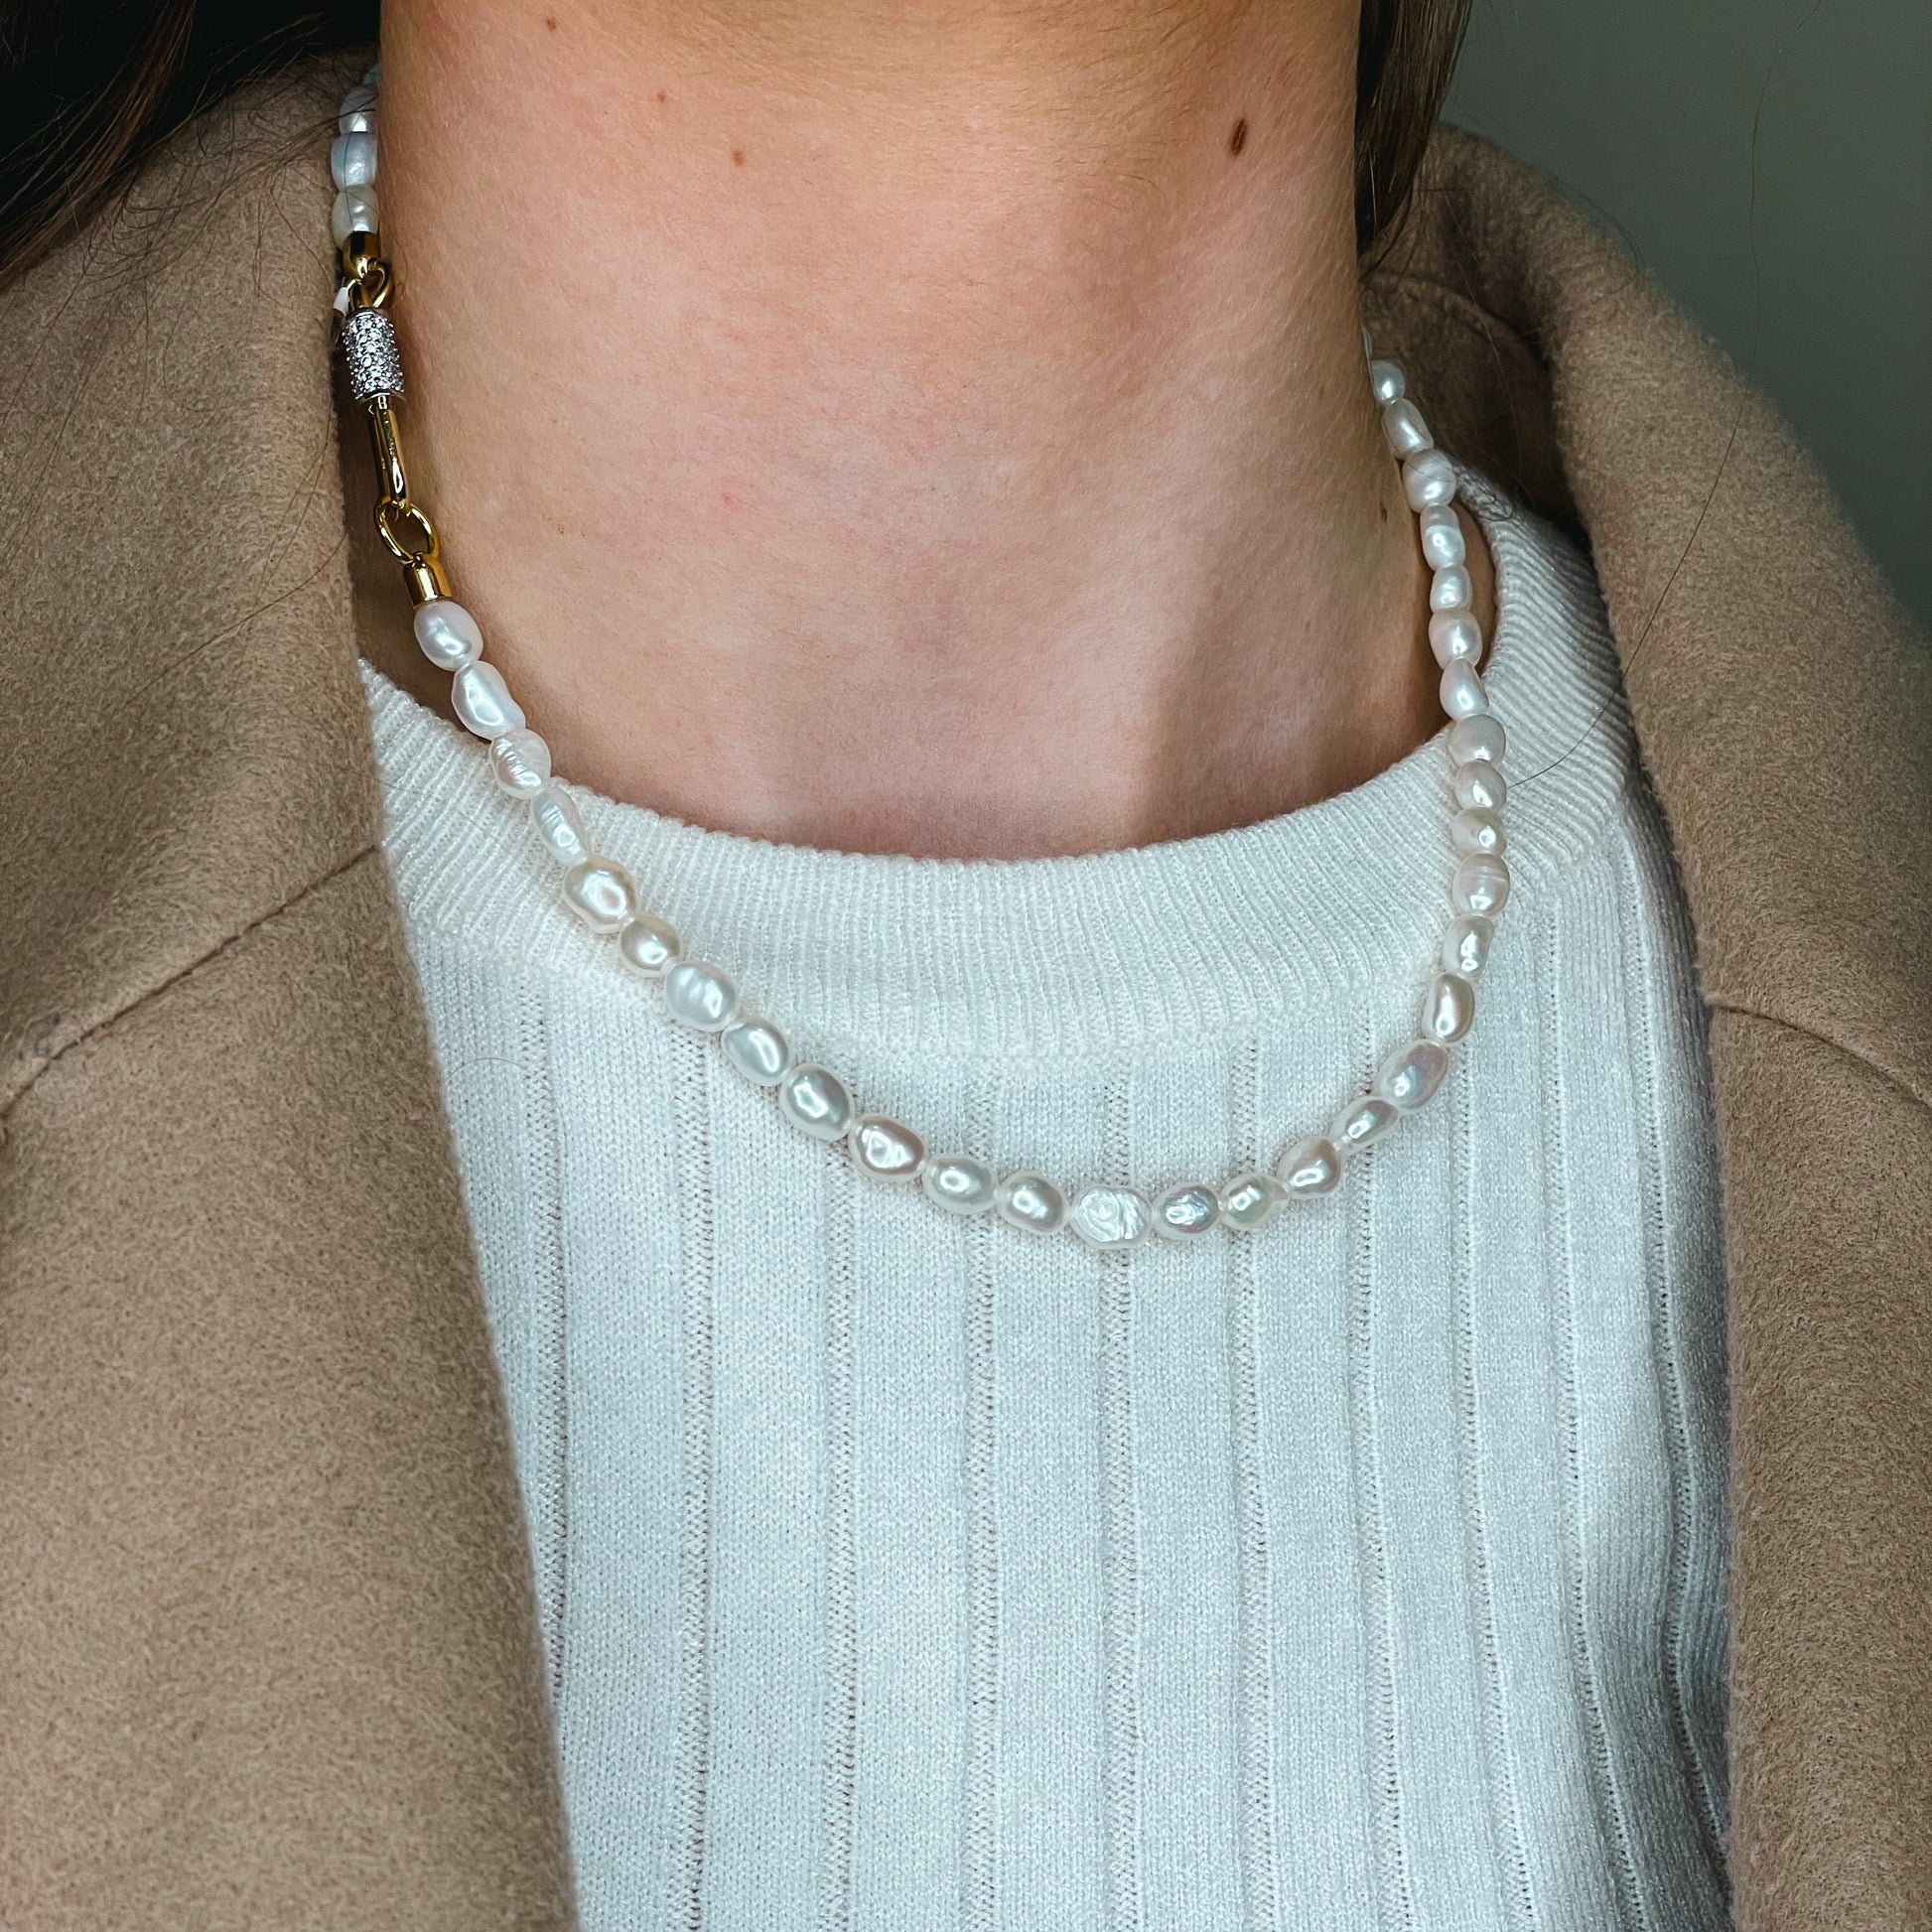 REBECCA Palermo Necklace - Gold & Pearl - John Ross Jewellers